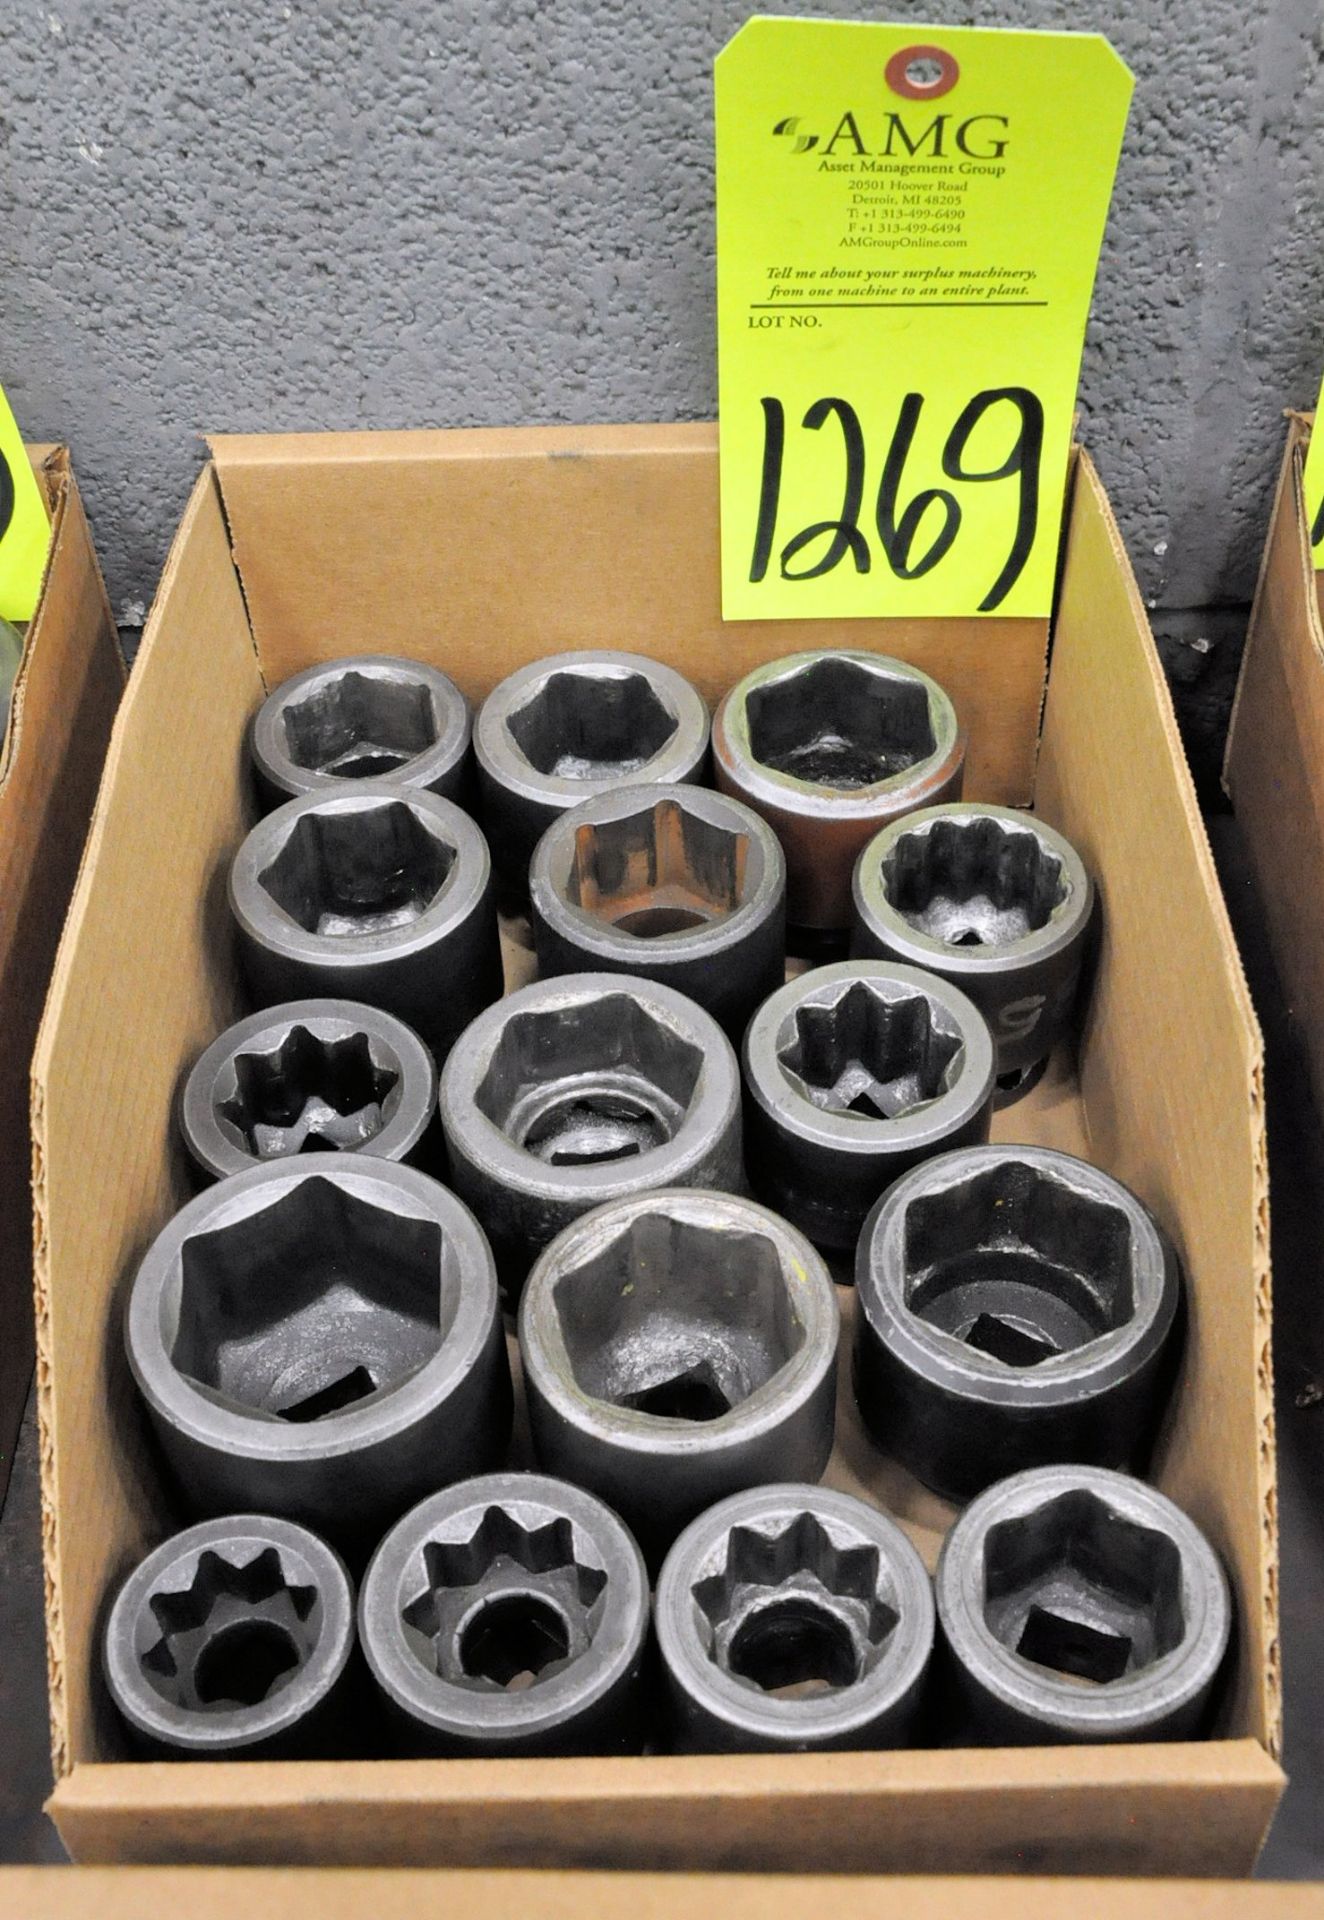 Lot-3/4" Drive Sockets in (3) Boxes, (G-17), (Yellow Tag) - Image 2 of 3